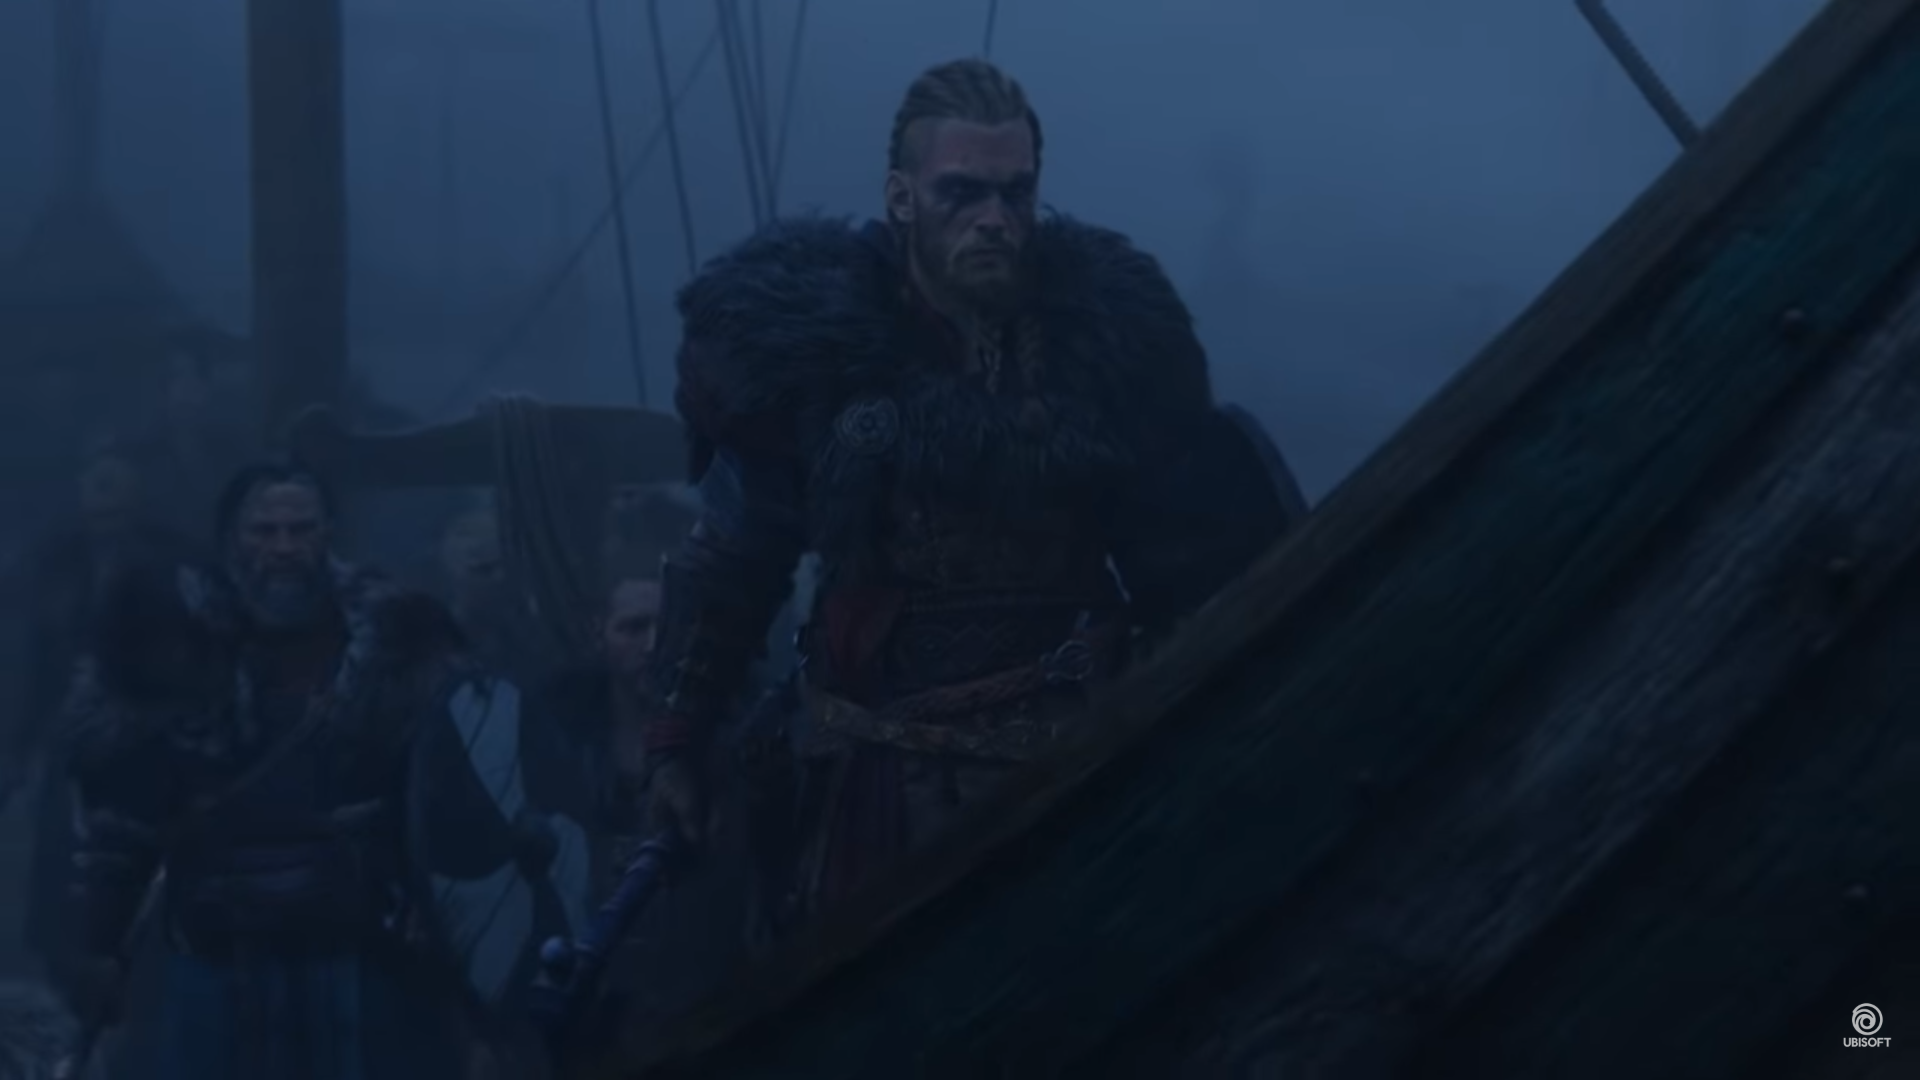 Image for Assassin's Creed Valhalla's will feature longships, raiding, and epic battles